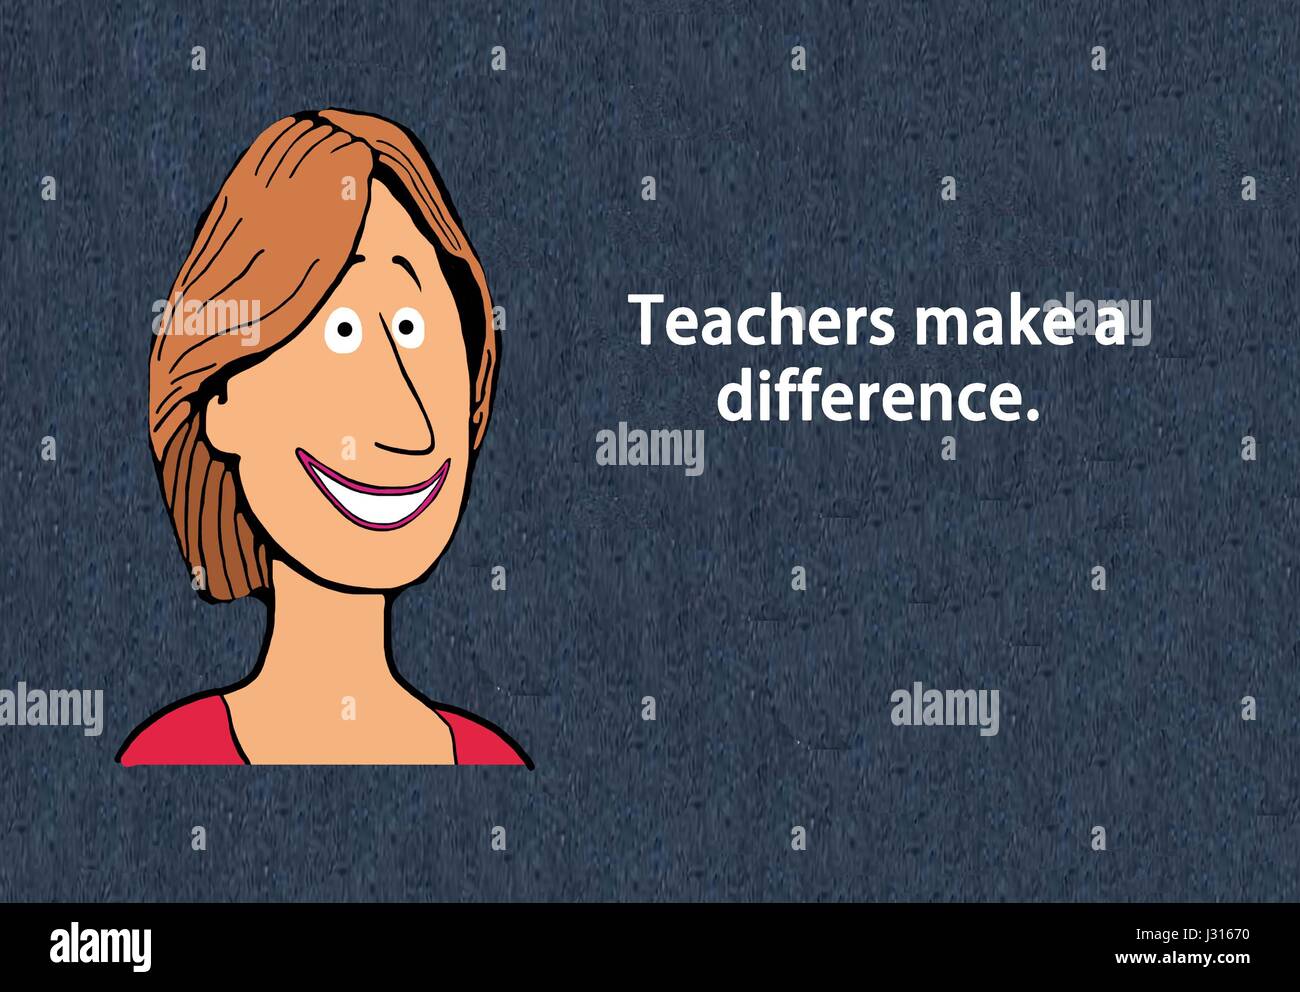 Cartoon illustration of a smiling woman and the words 'teachers make a difference'. Stock Photo